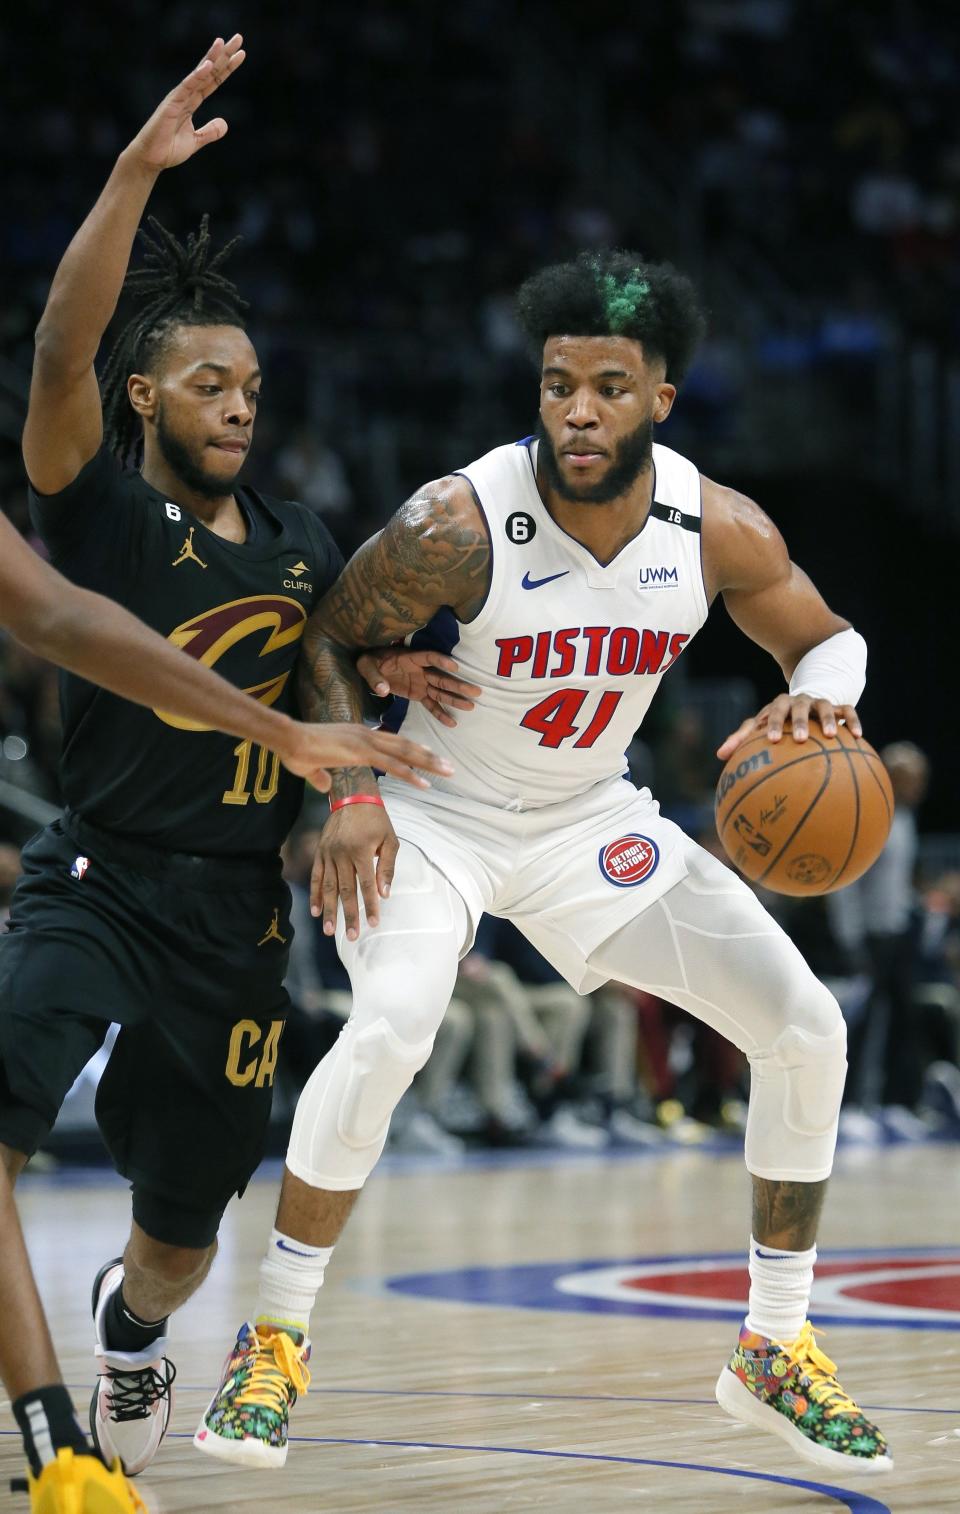 Detroit Pistons forward Saddiq Bey (41) drives against Cleveland Cavaliers guard Darius Garland (10) during the first half at Little Caesars Arena in Detroit on Sunday, Nov. 27, 2022.